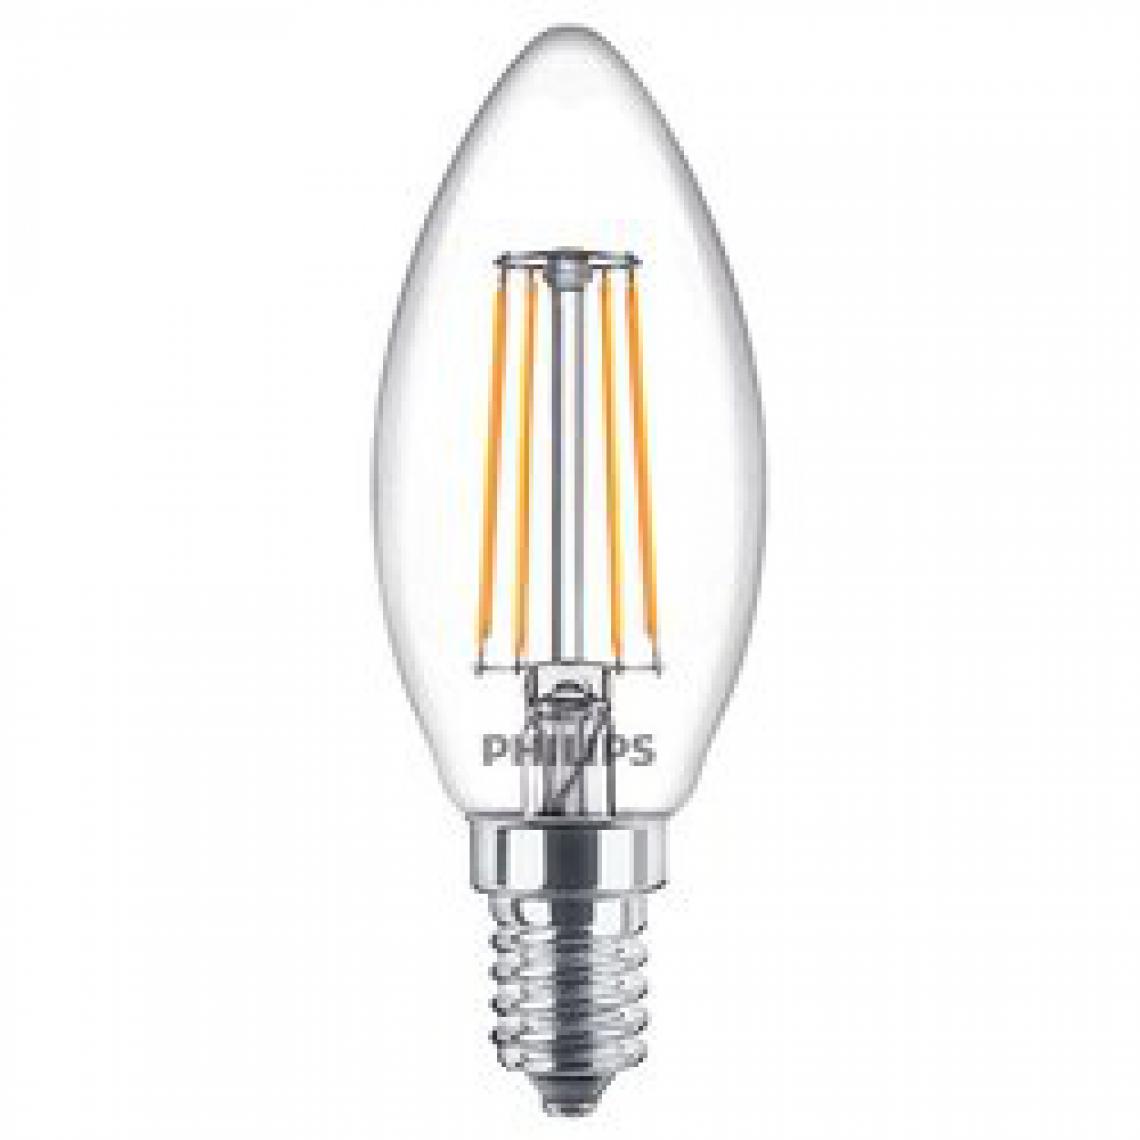 Philips - PHILIPS LED Classic 40W Flamme E14 Blanc Chaud Non Dimmable - Ampoules LED